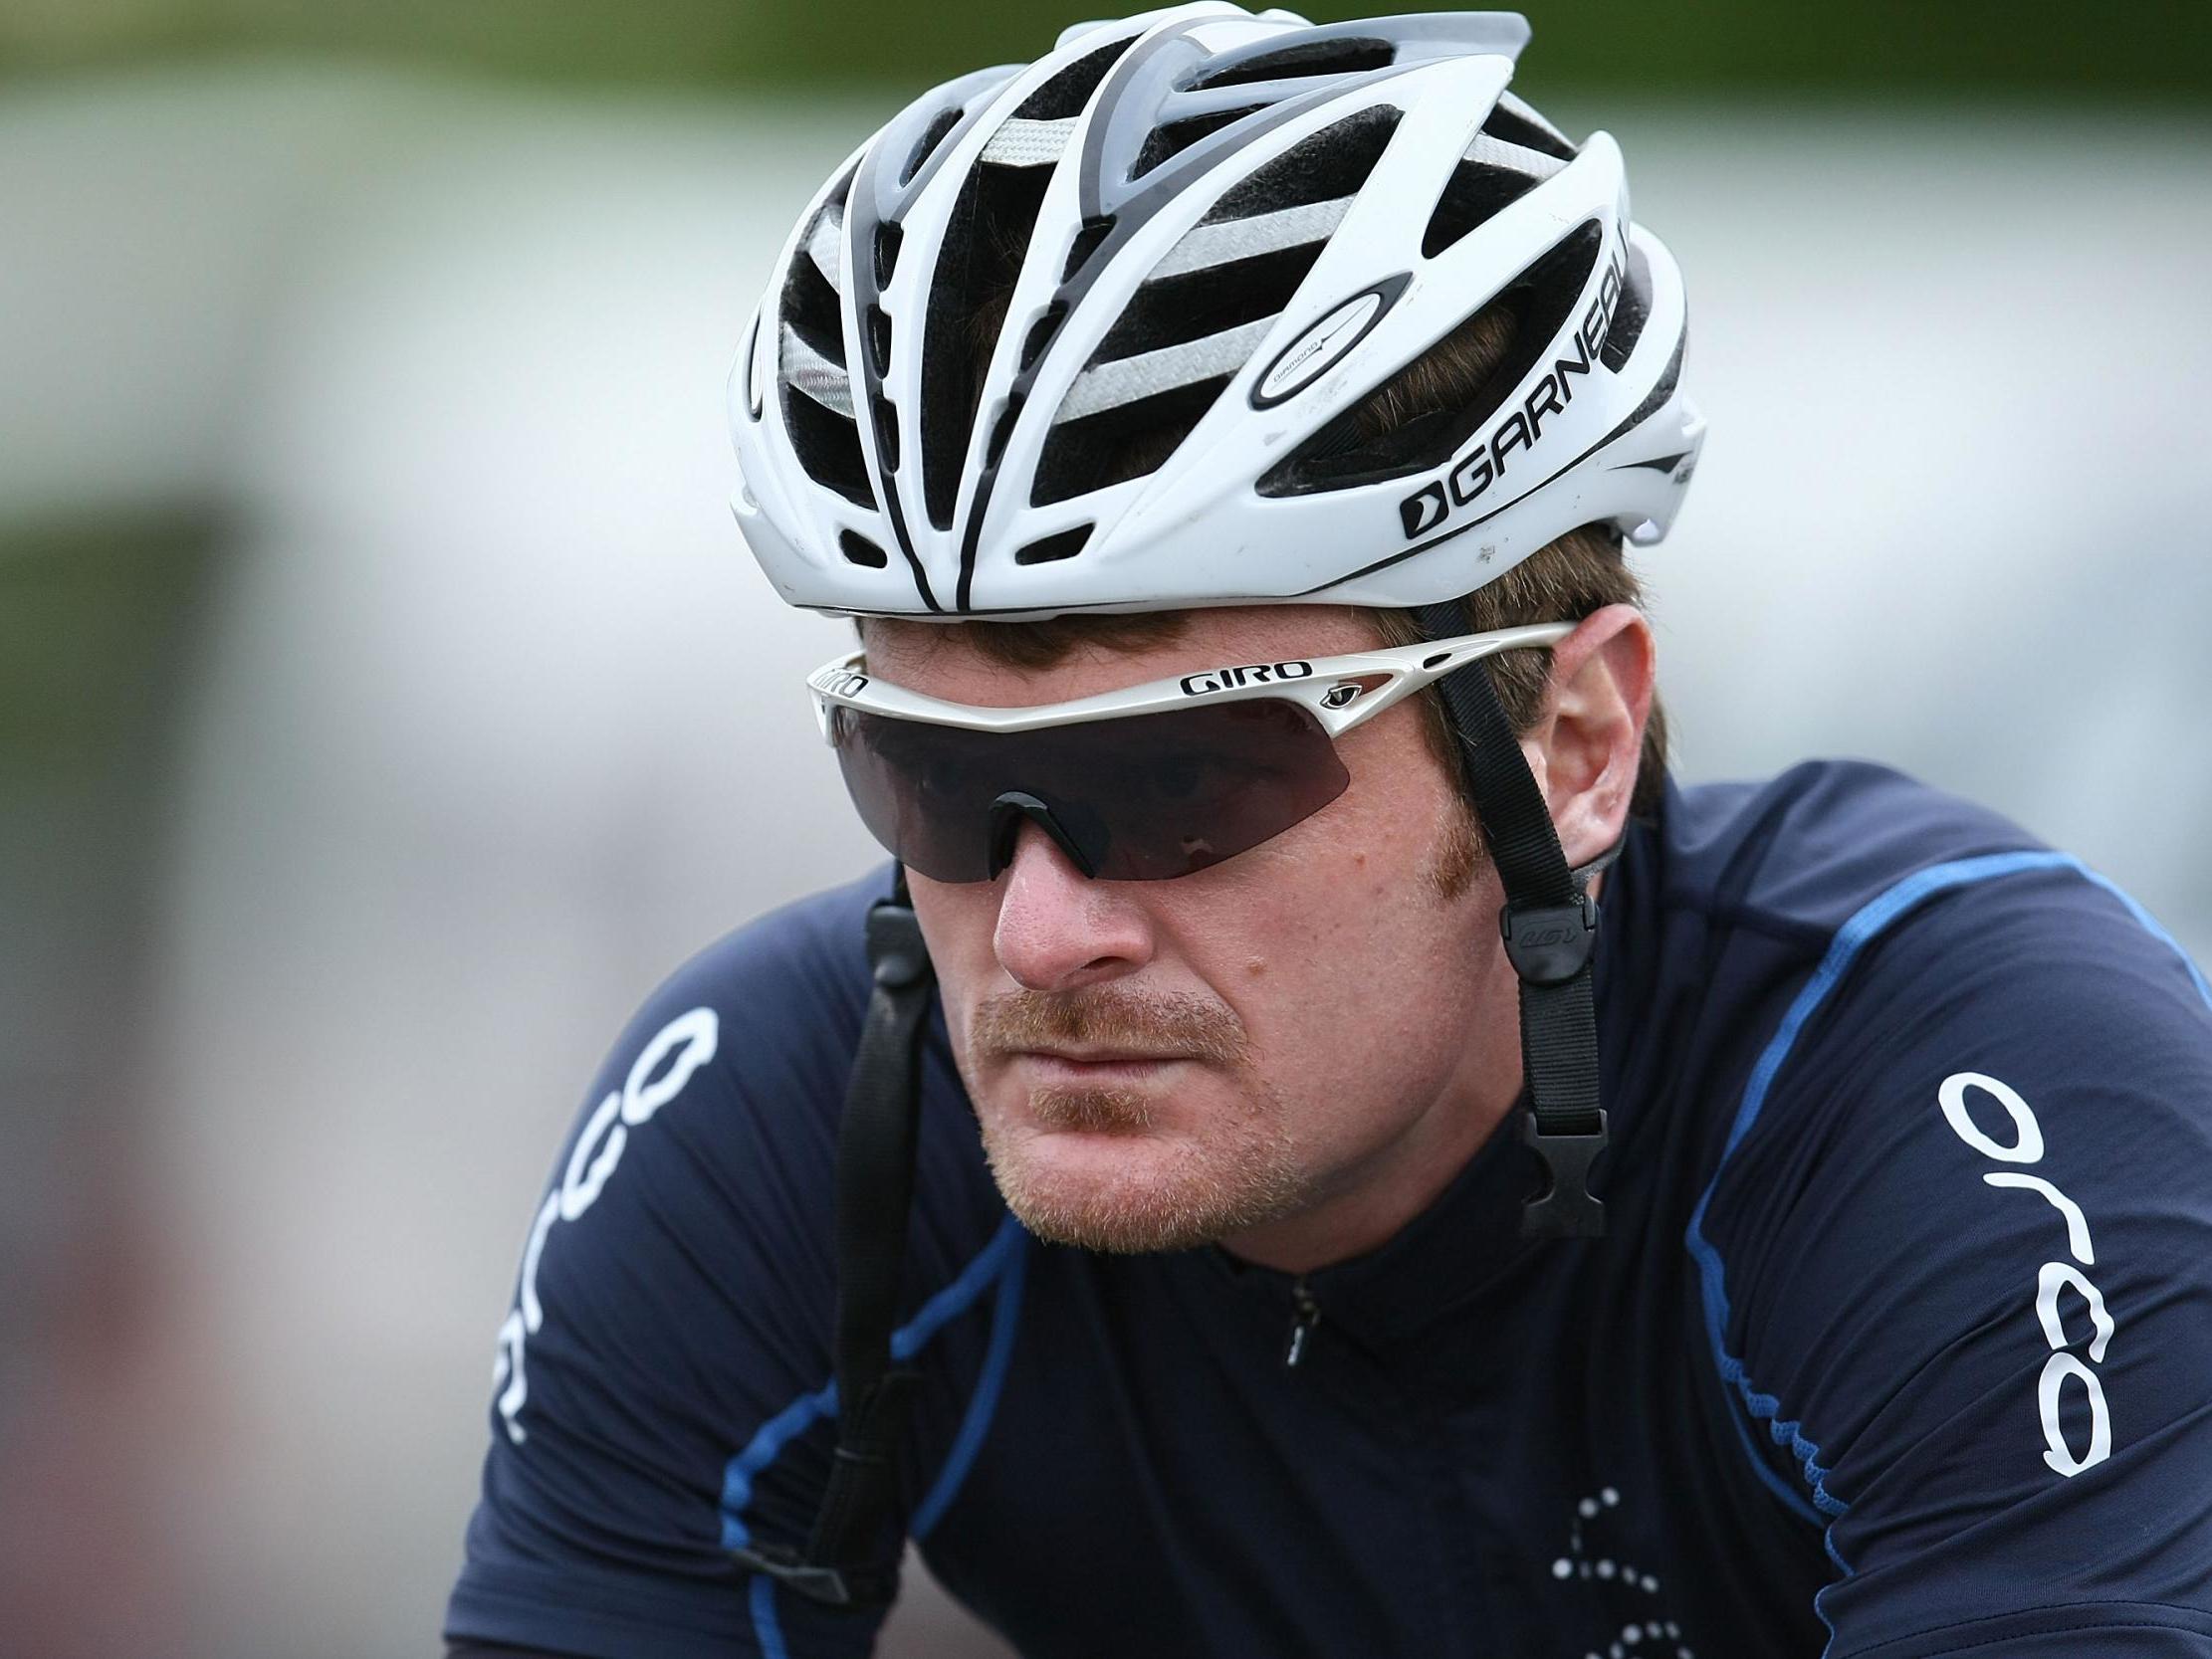 Floyd Landis is set to start a new professional cycling team